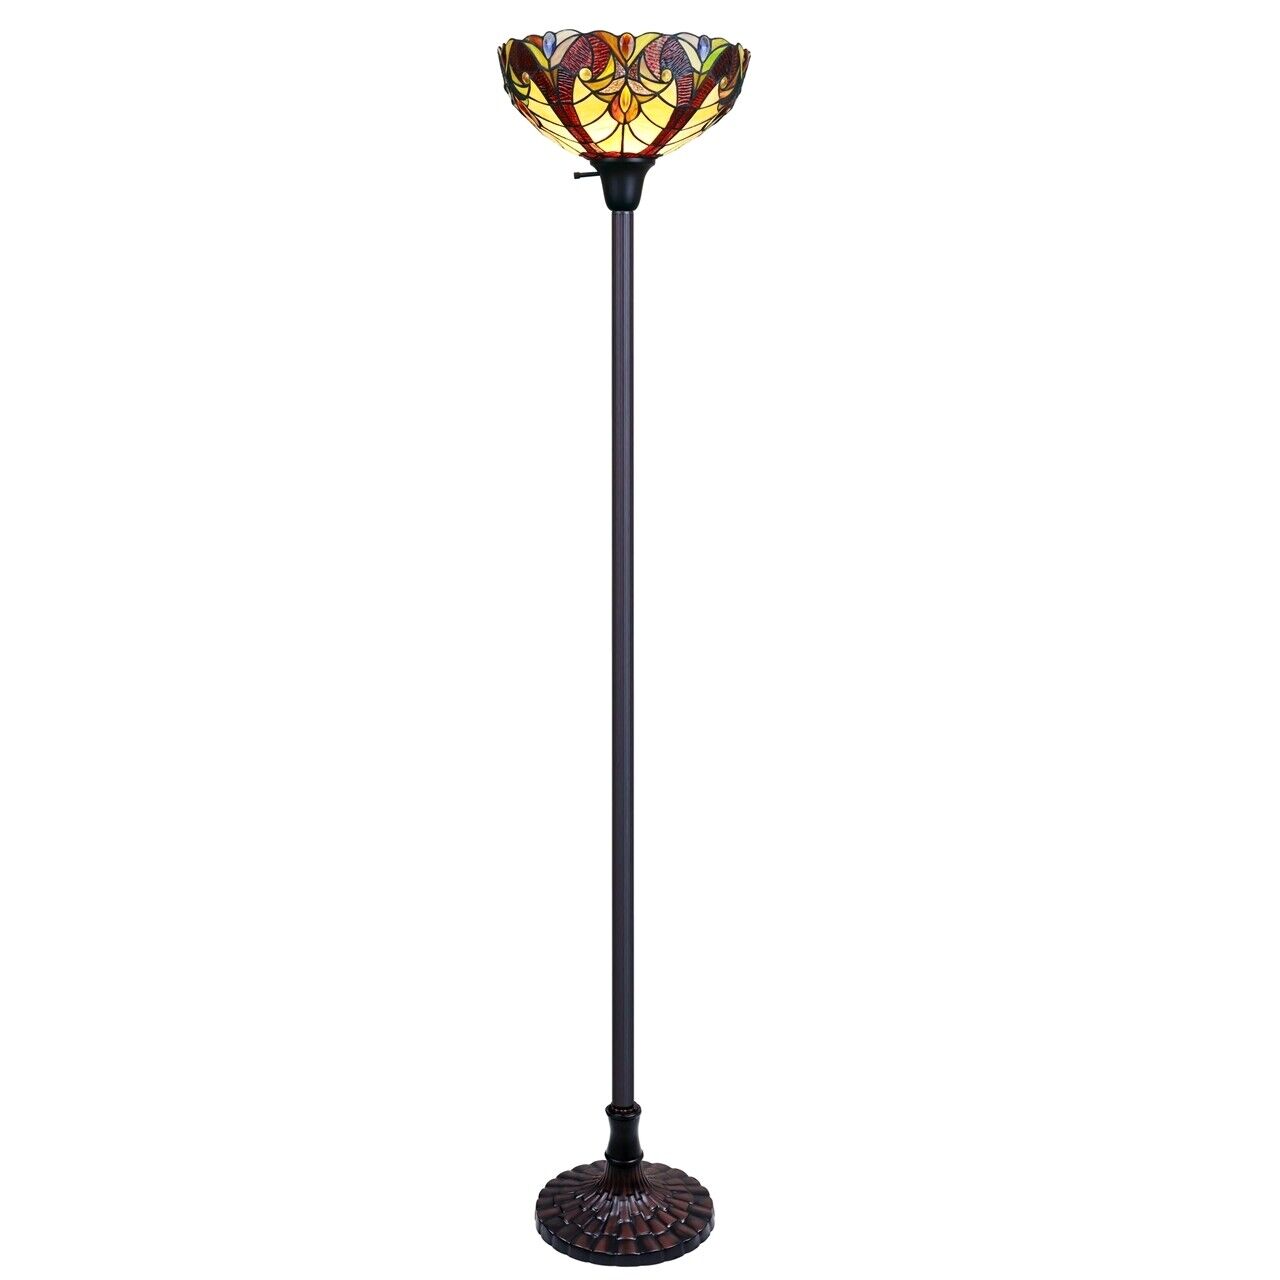 69 1/2" Antique Style Stained Glass Torchier Up light Floor Lamp